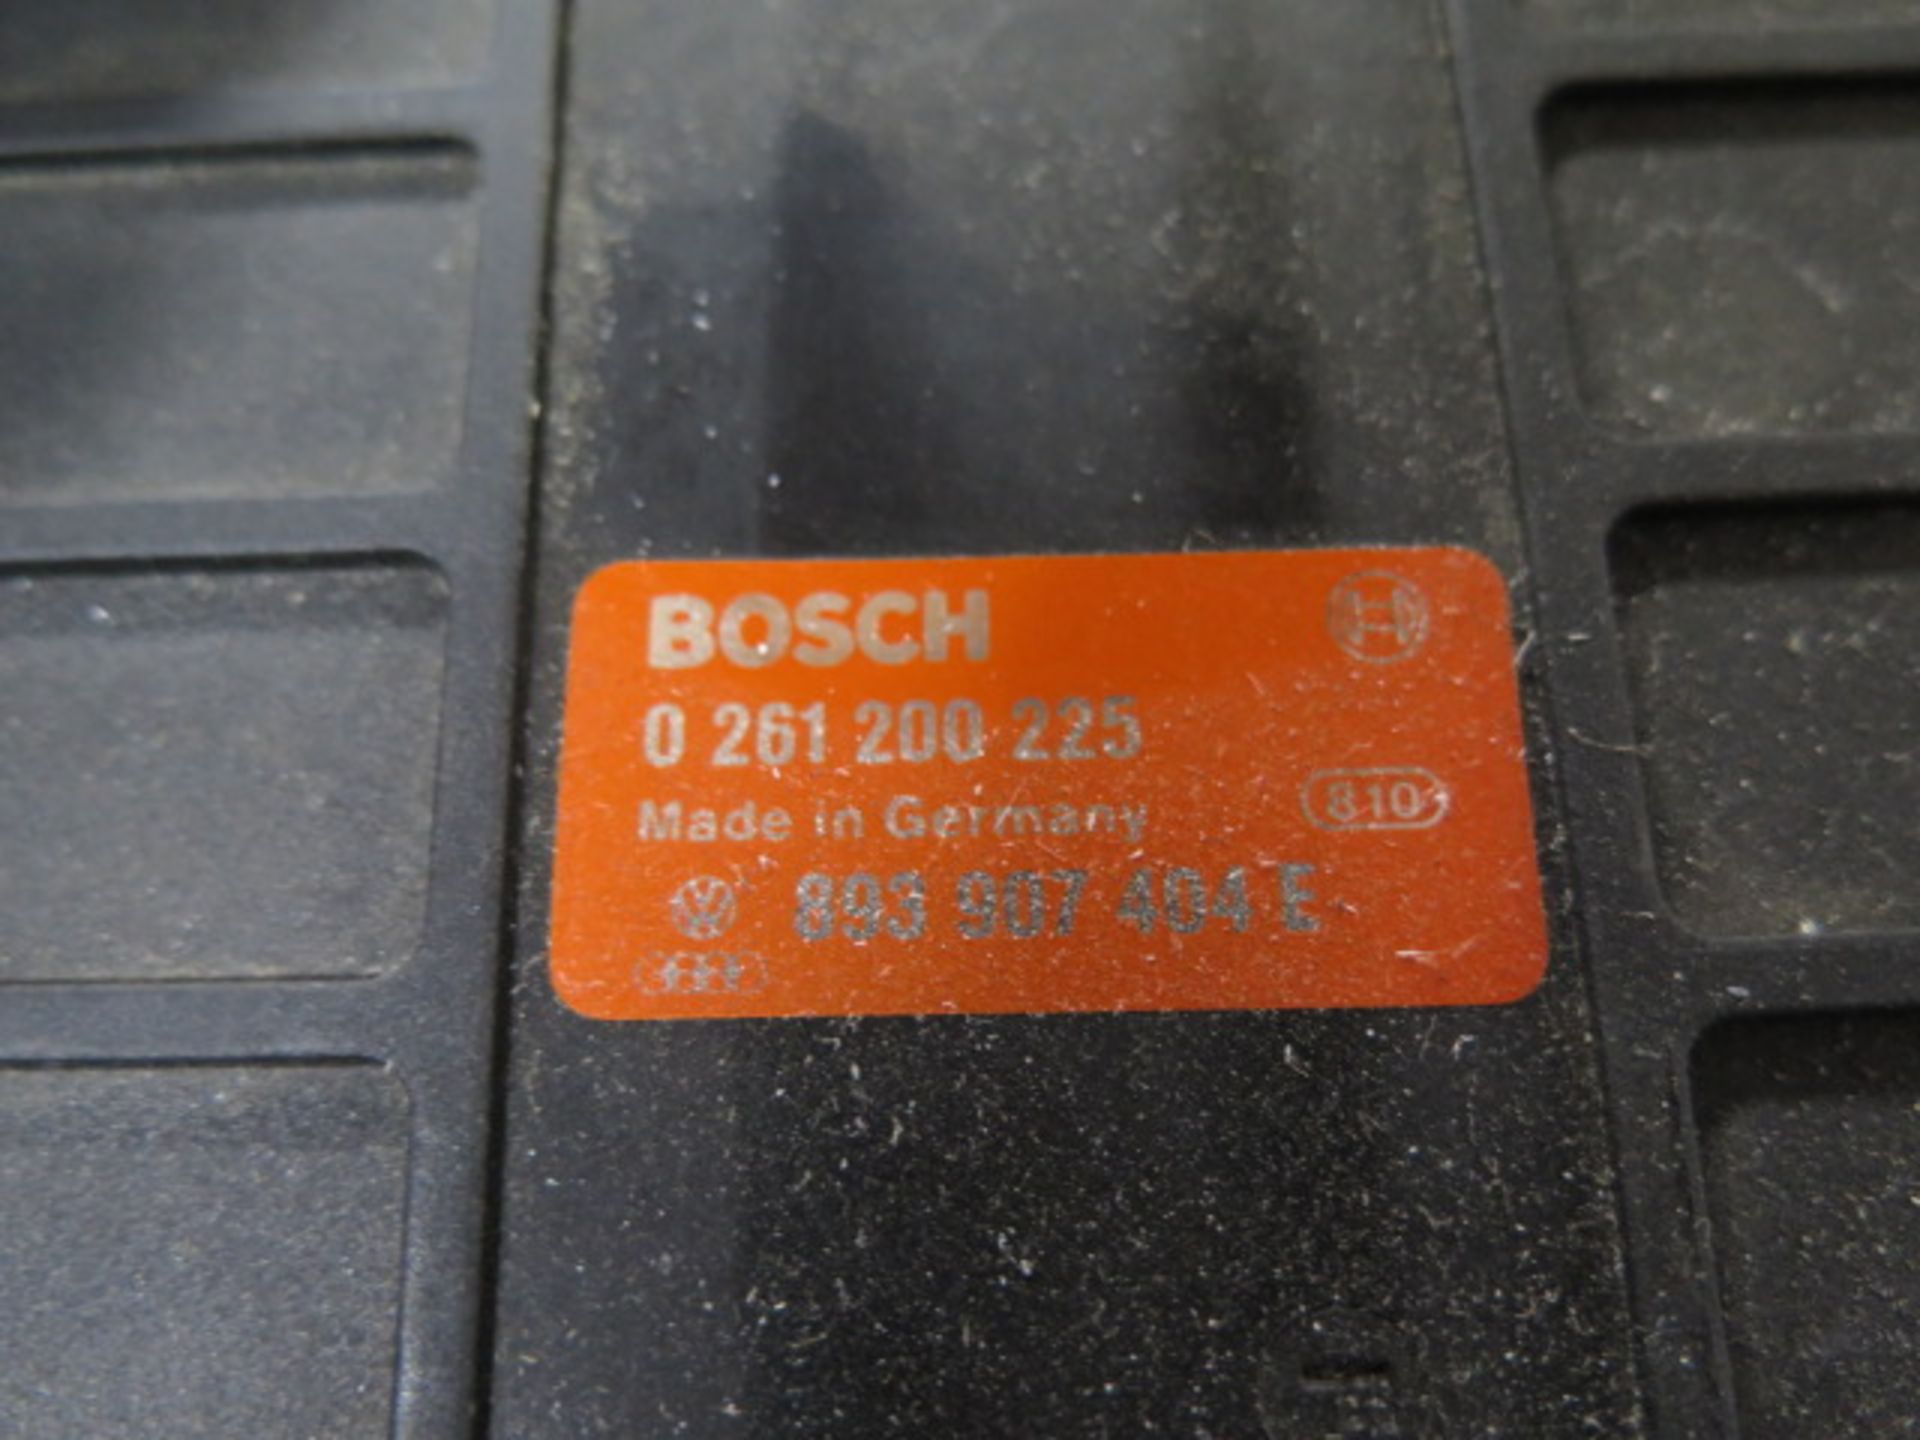 Bosch 0-261-200-225 Volkswagen ECU Engine Control Unit (430 - Check PICs for Part Numbers) (SOLD - Image 6 of 7